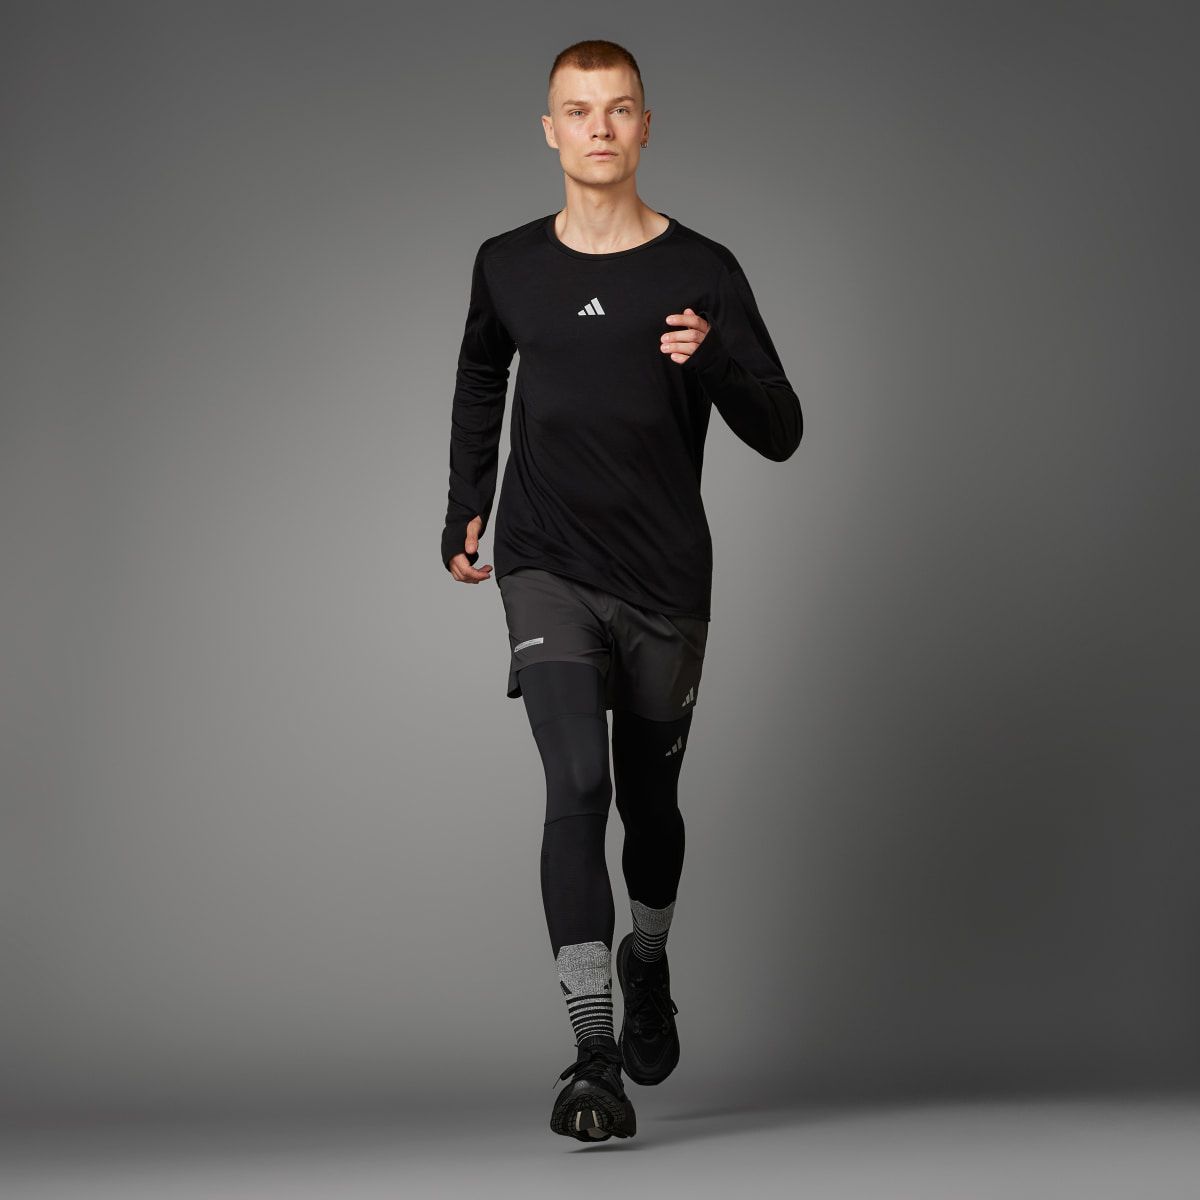 Adidas Ultimate Running Conquer the Elements Merino Longsleeve. 10